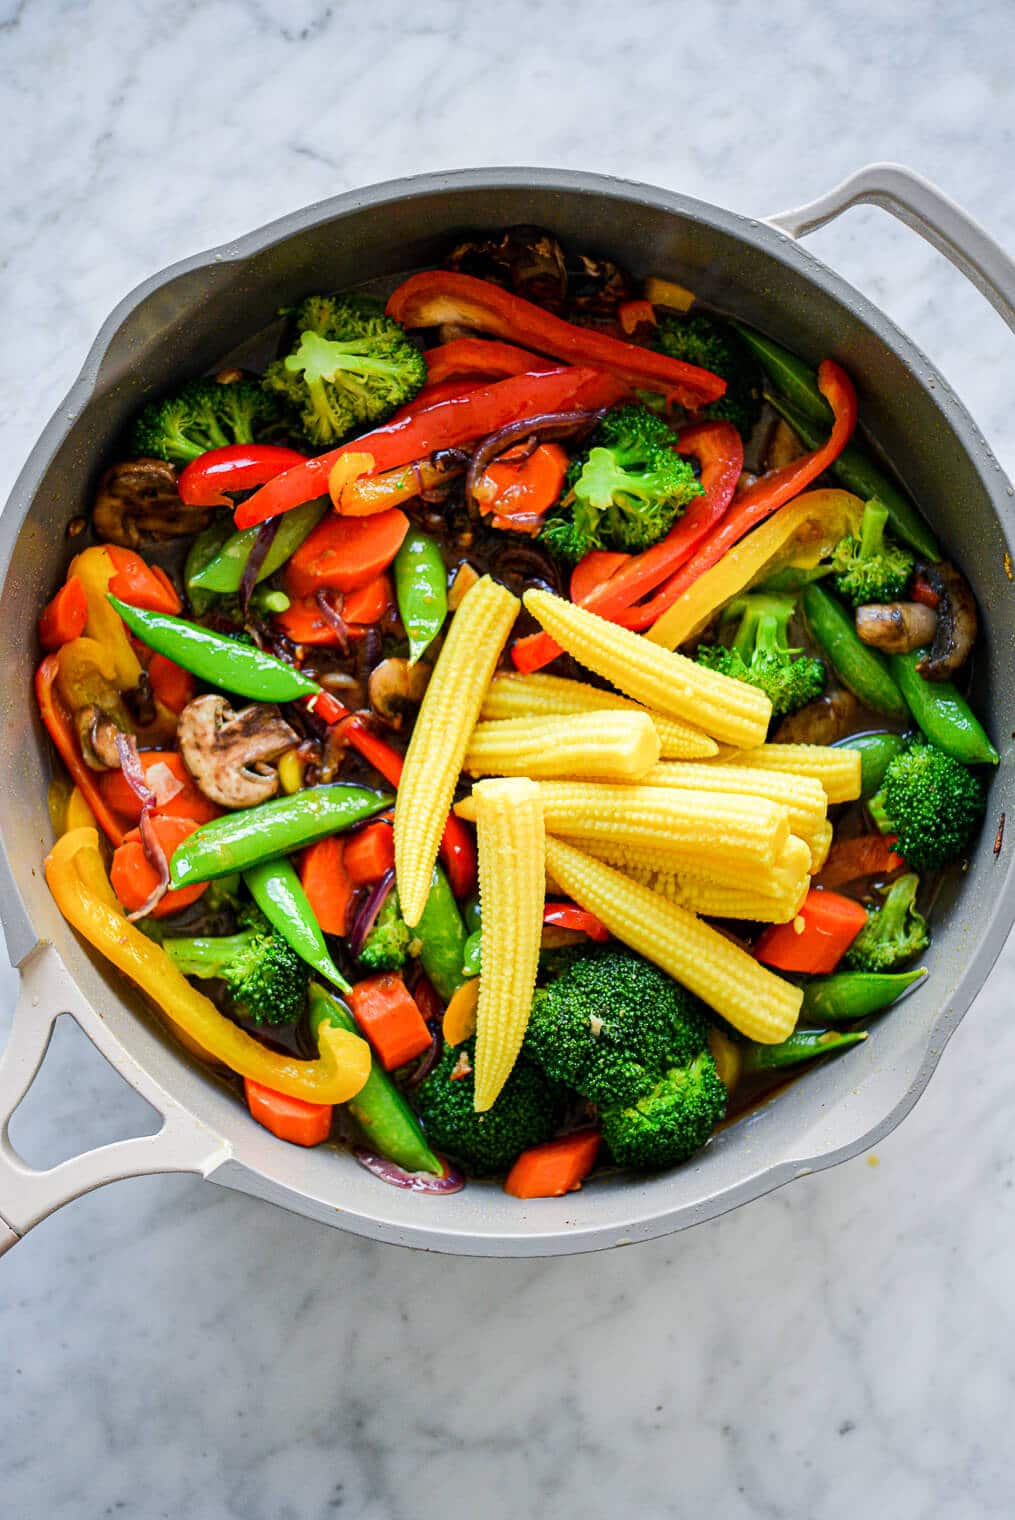 Pan with assortment of stir fry vegetables (baby corn, sugar peas, sliced red and yellow bell pepper, sliced carrots, broccoli, sliced mushrooms, and sliced red onion) sitting on grey and white marble countertop